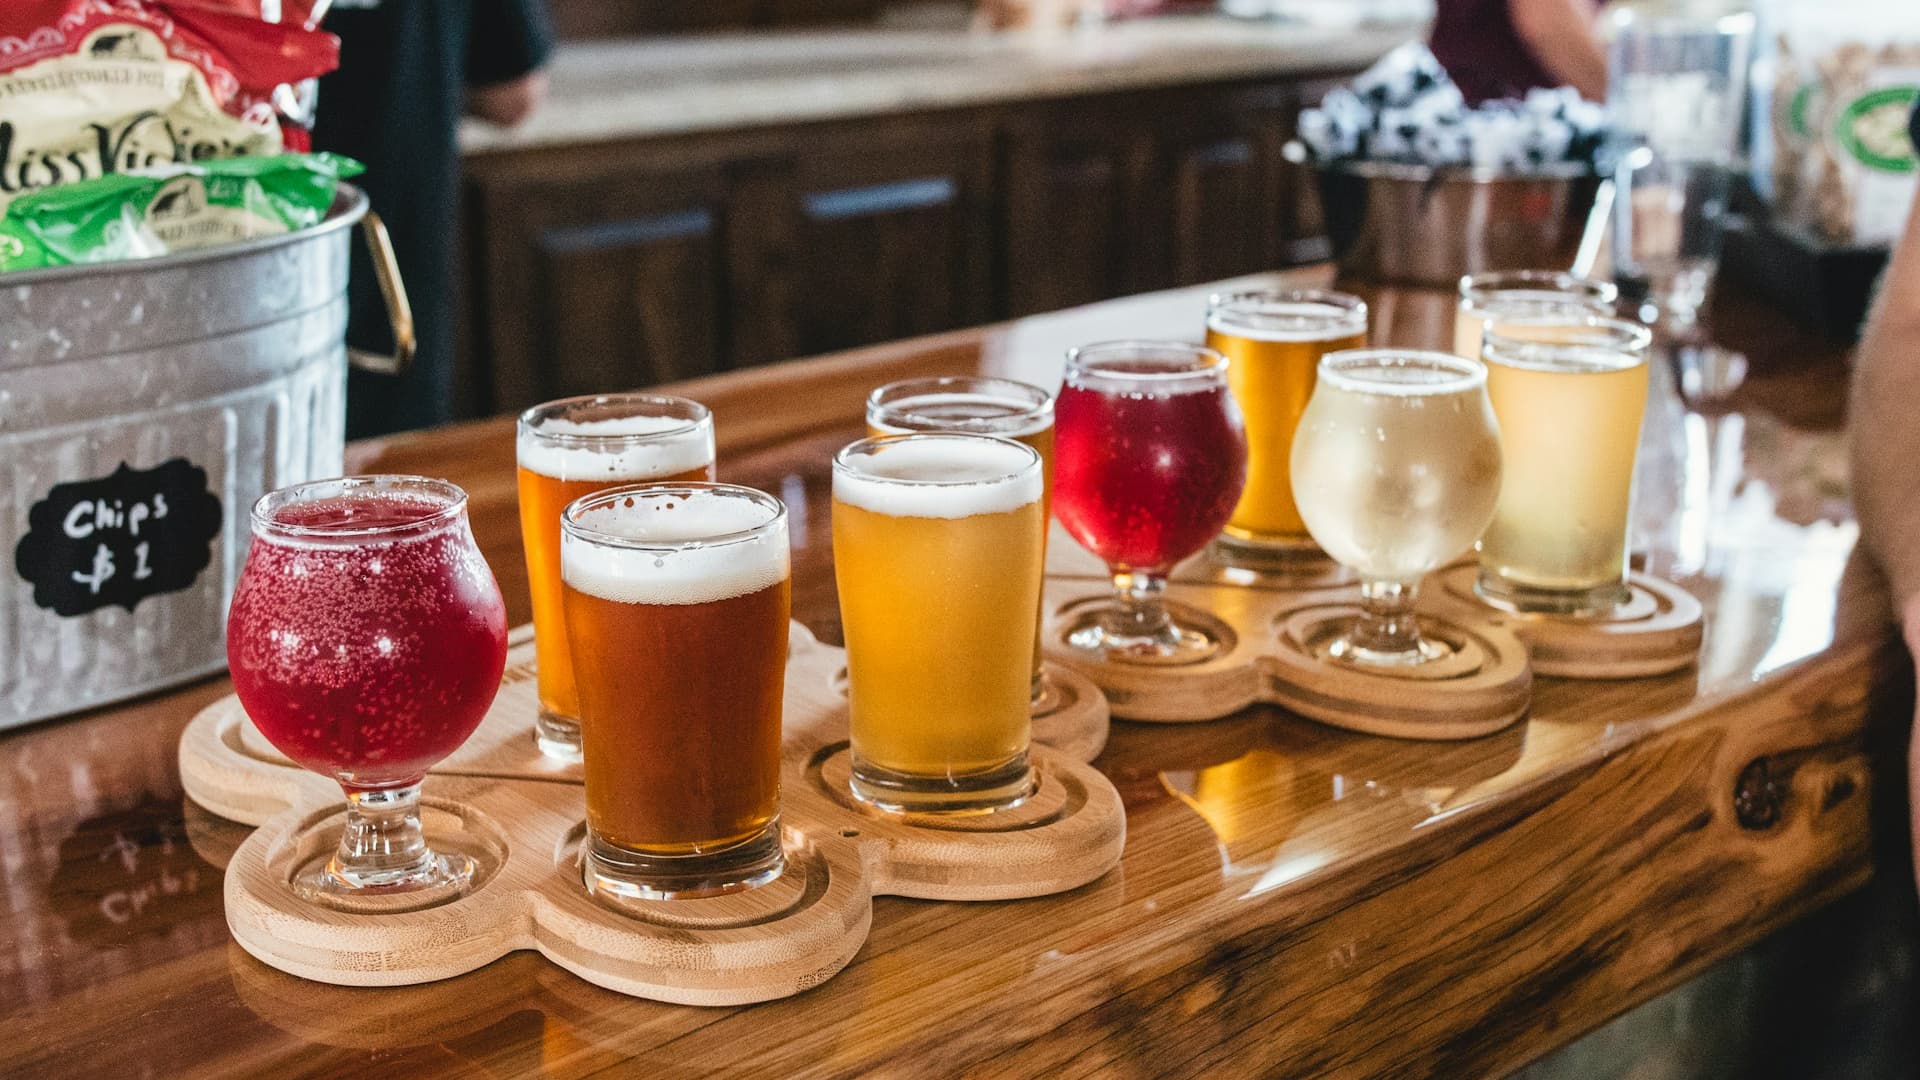 With These Tips, Plan A This Father’s Day Brewery Tour That’s Anything But Ordinary